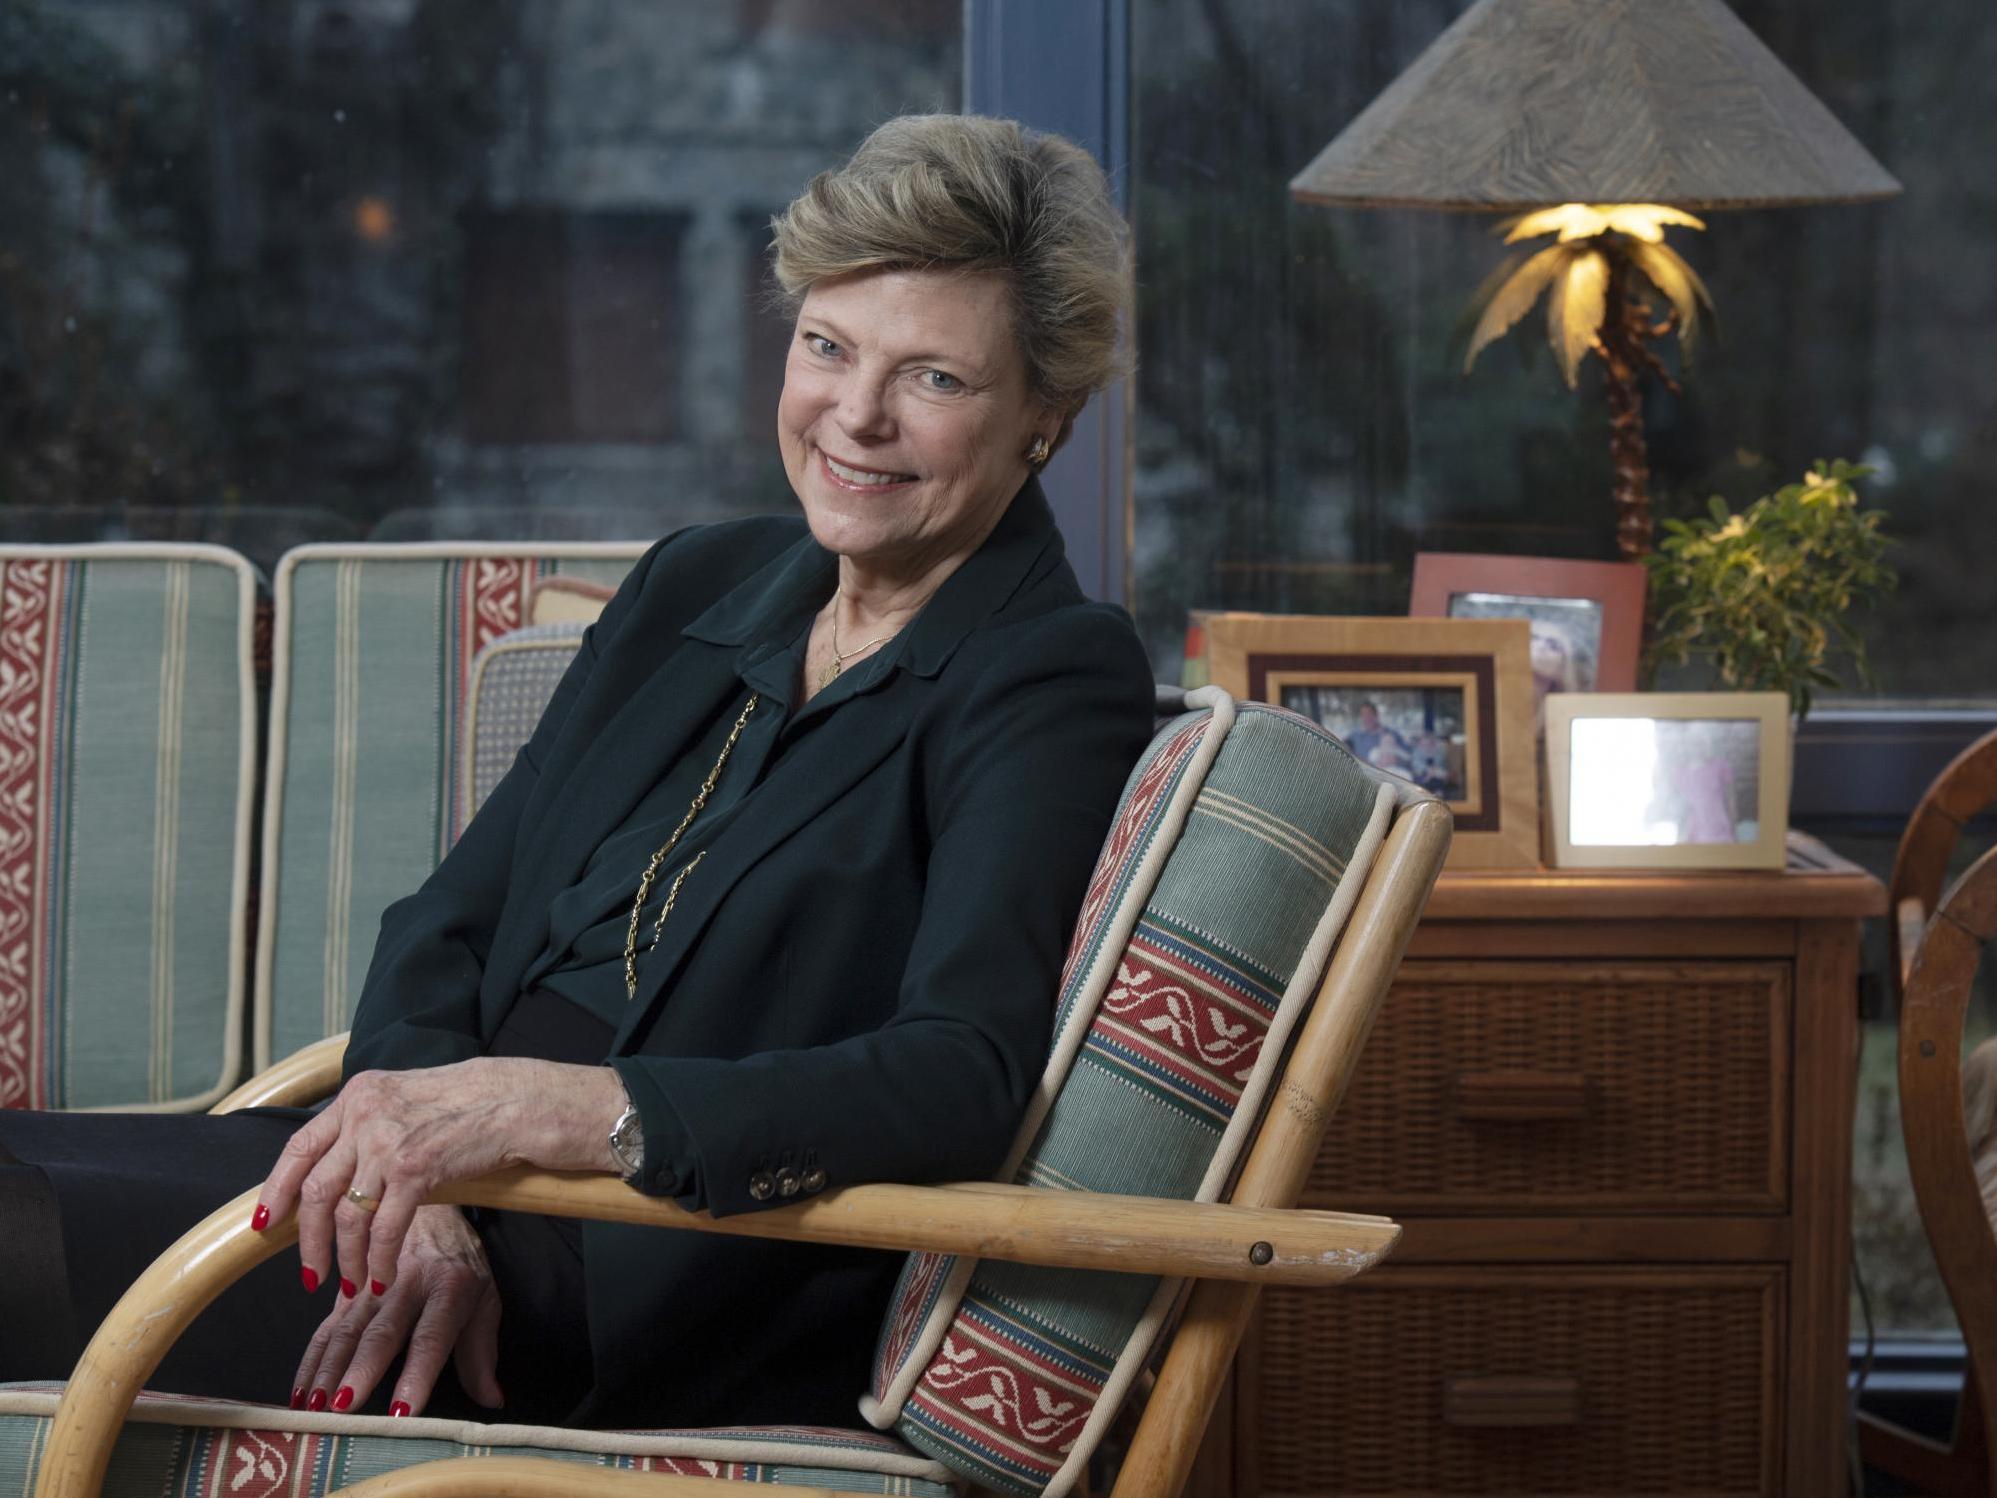 Cokie Roberts: Award-winning US journalist and political commentator